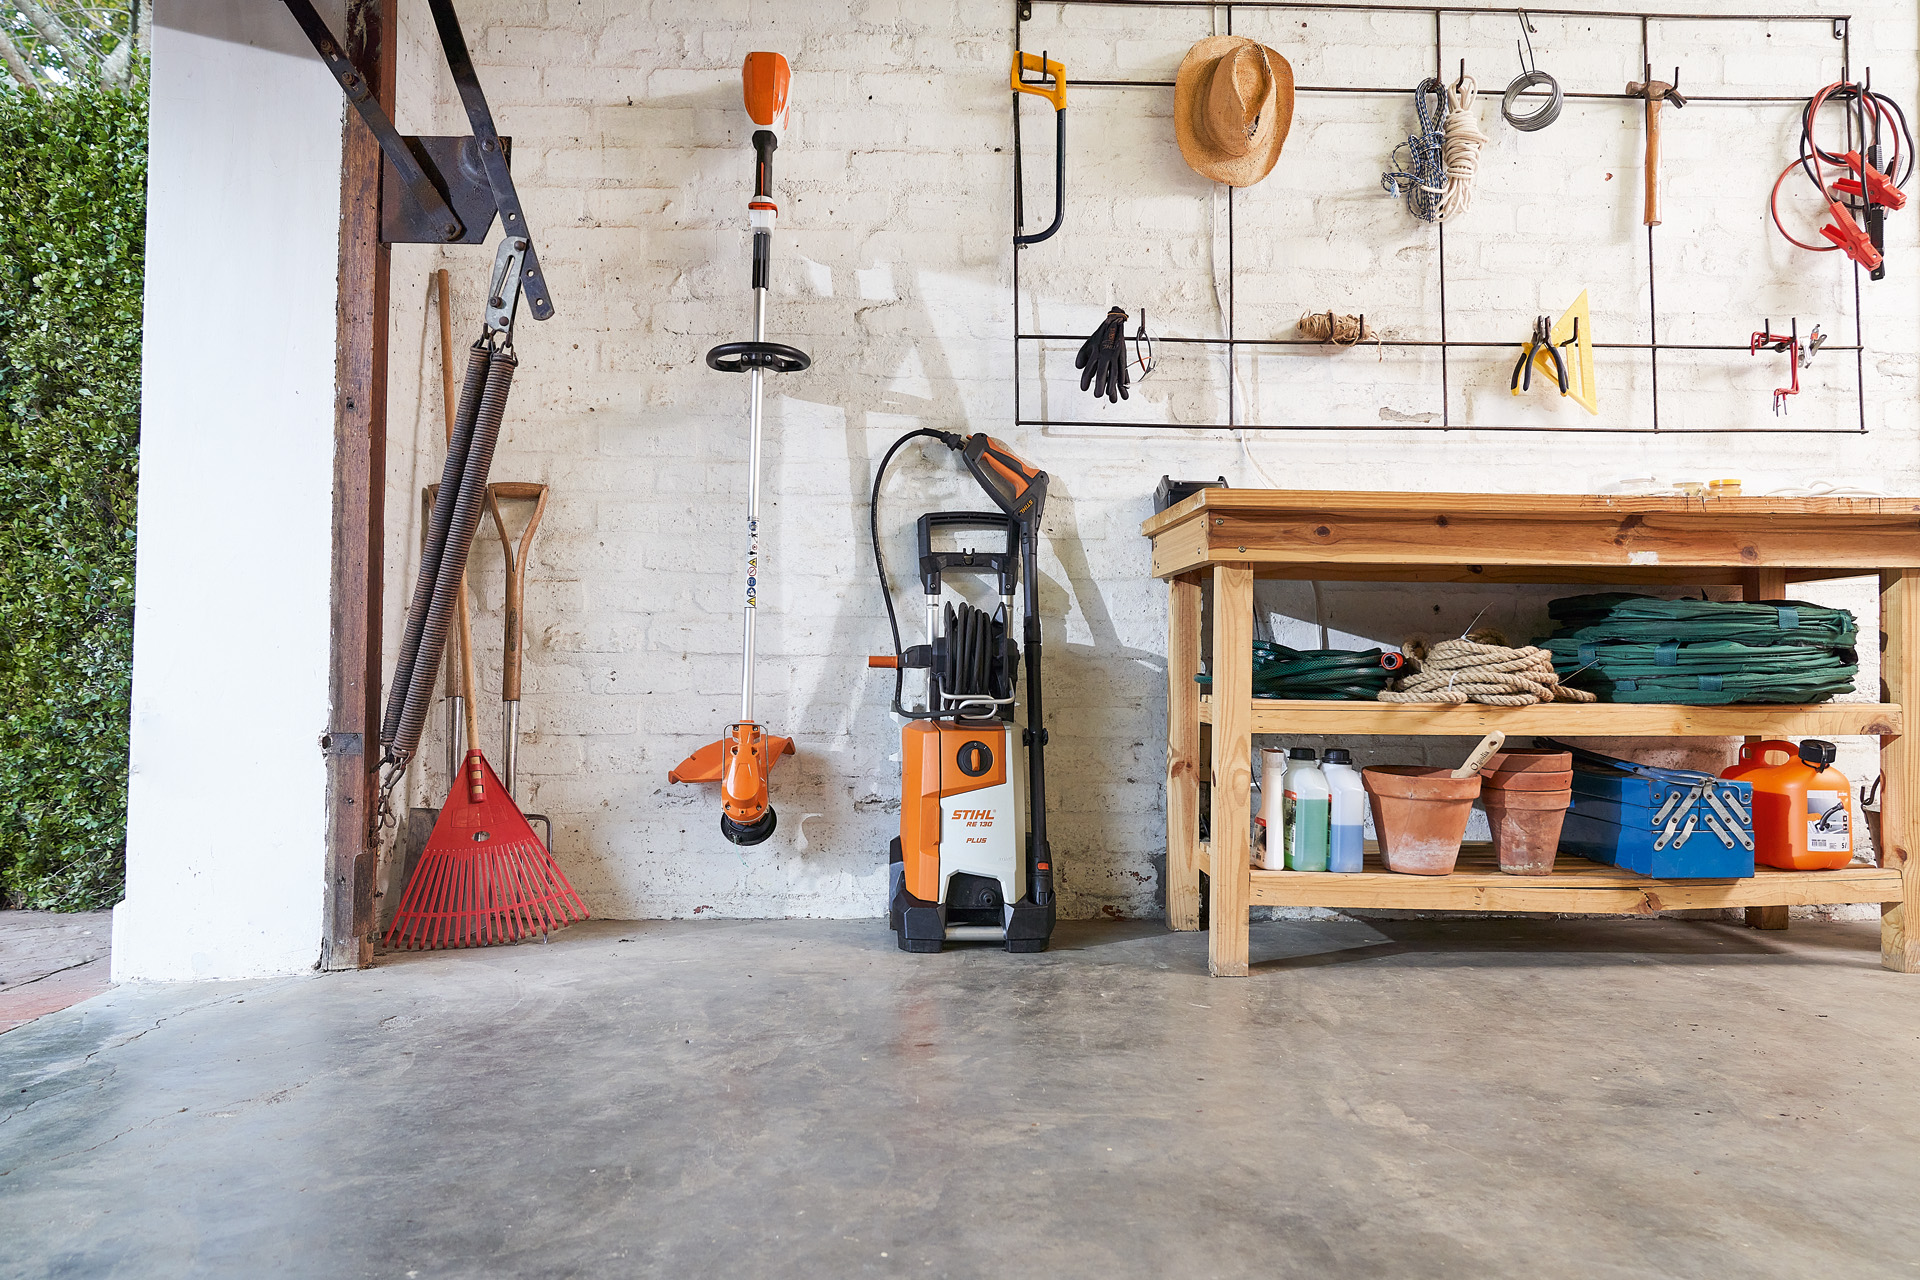 A STIHL RE 130 plus high-pressure cleaner and a STIHL brushcutter stored next to garden tools in a garage 